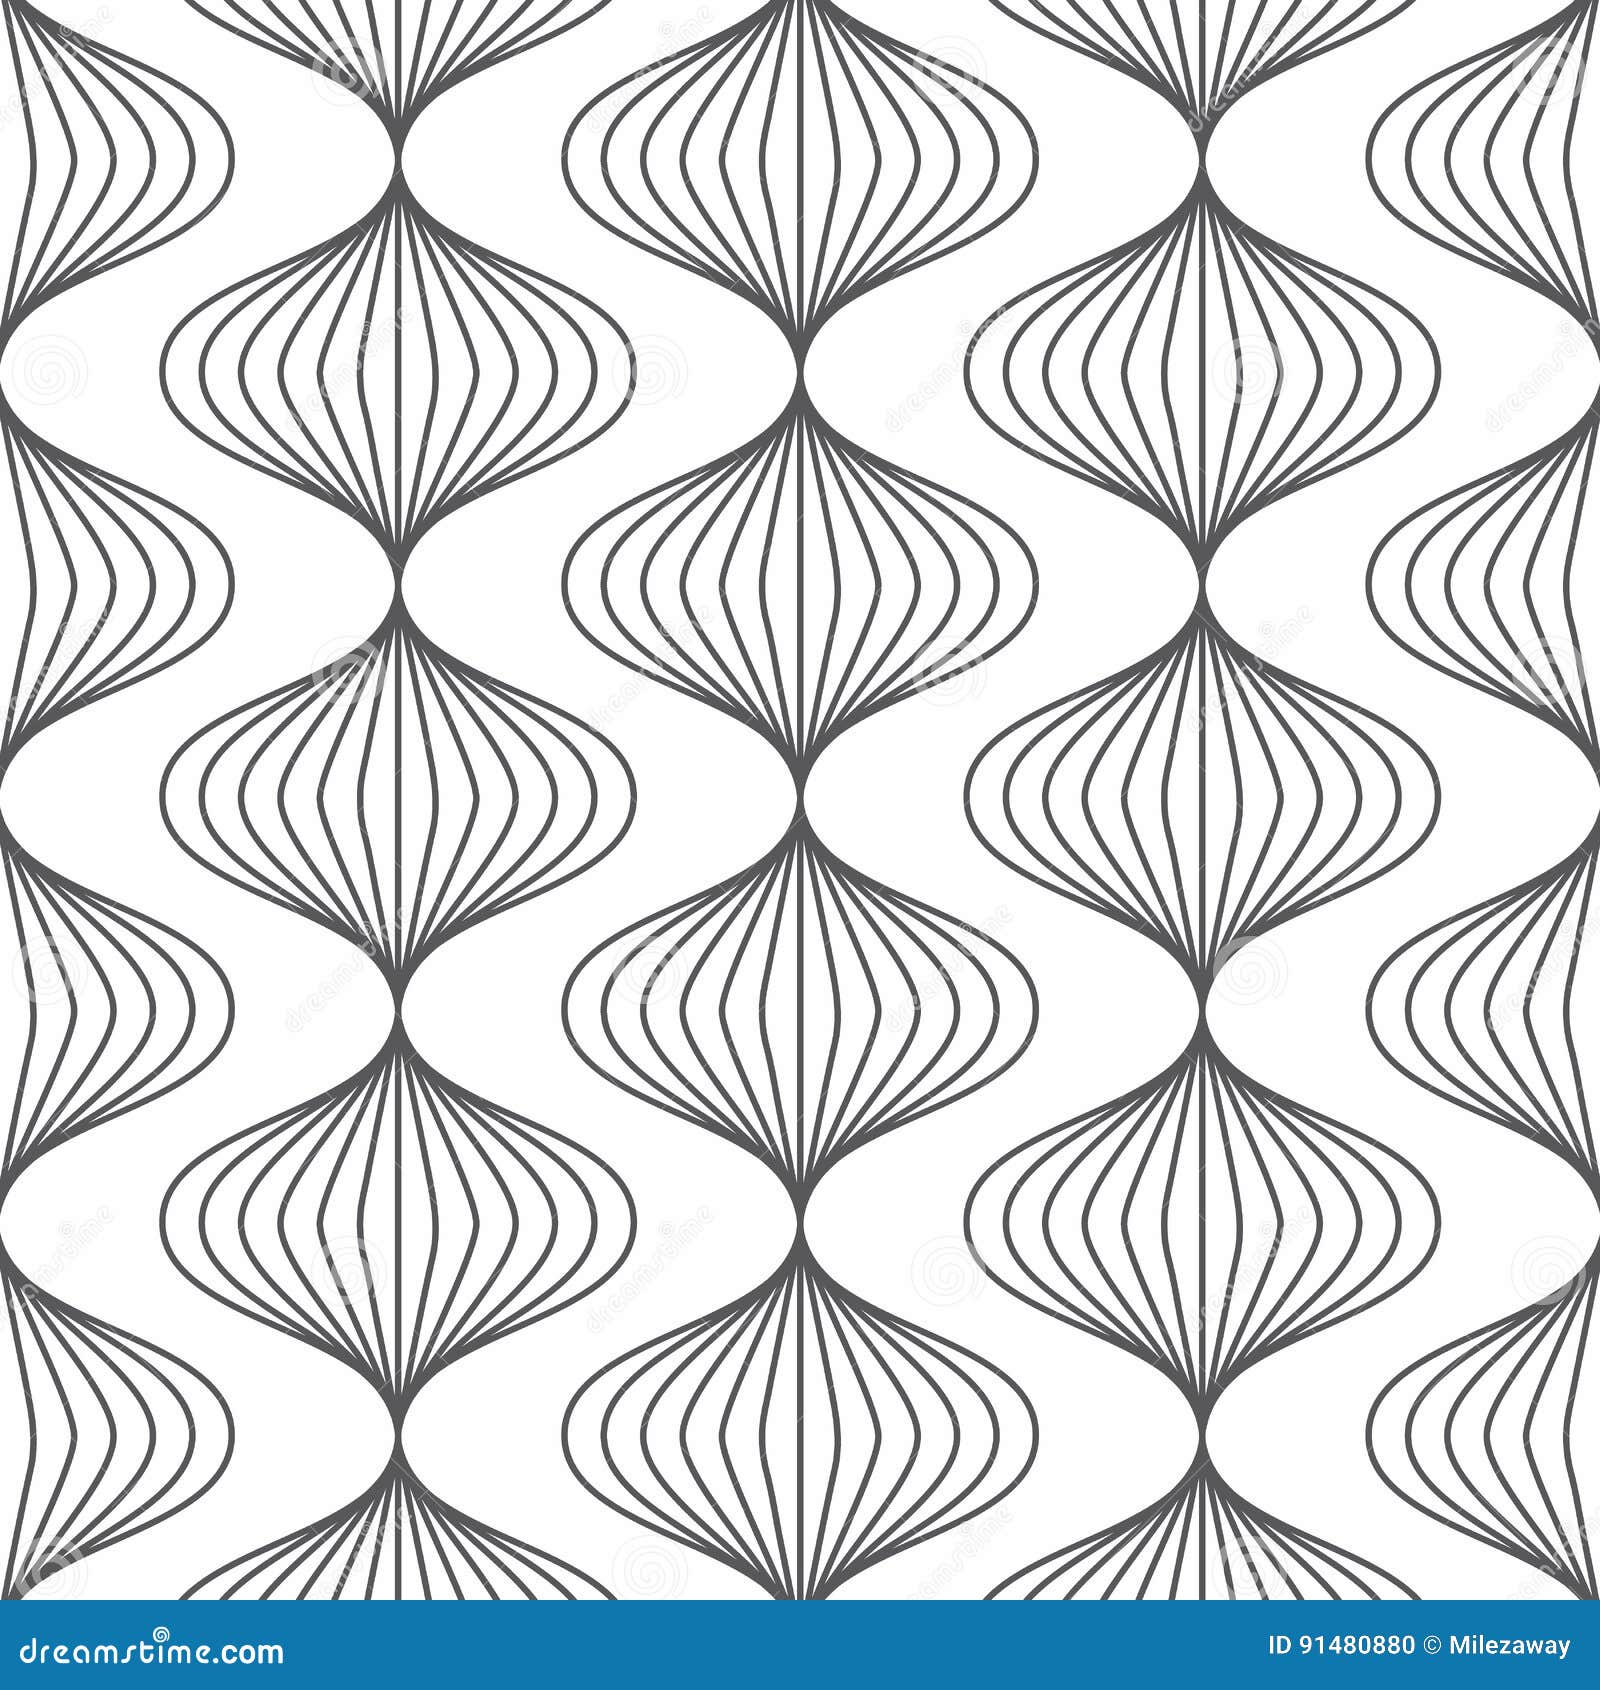 Linear Vector Pattern, Repeating Linear Abstract Leaves on Garland ...